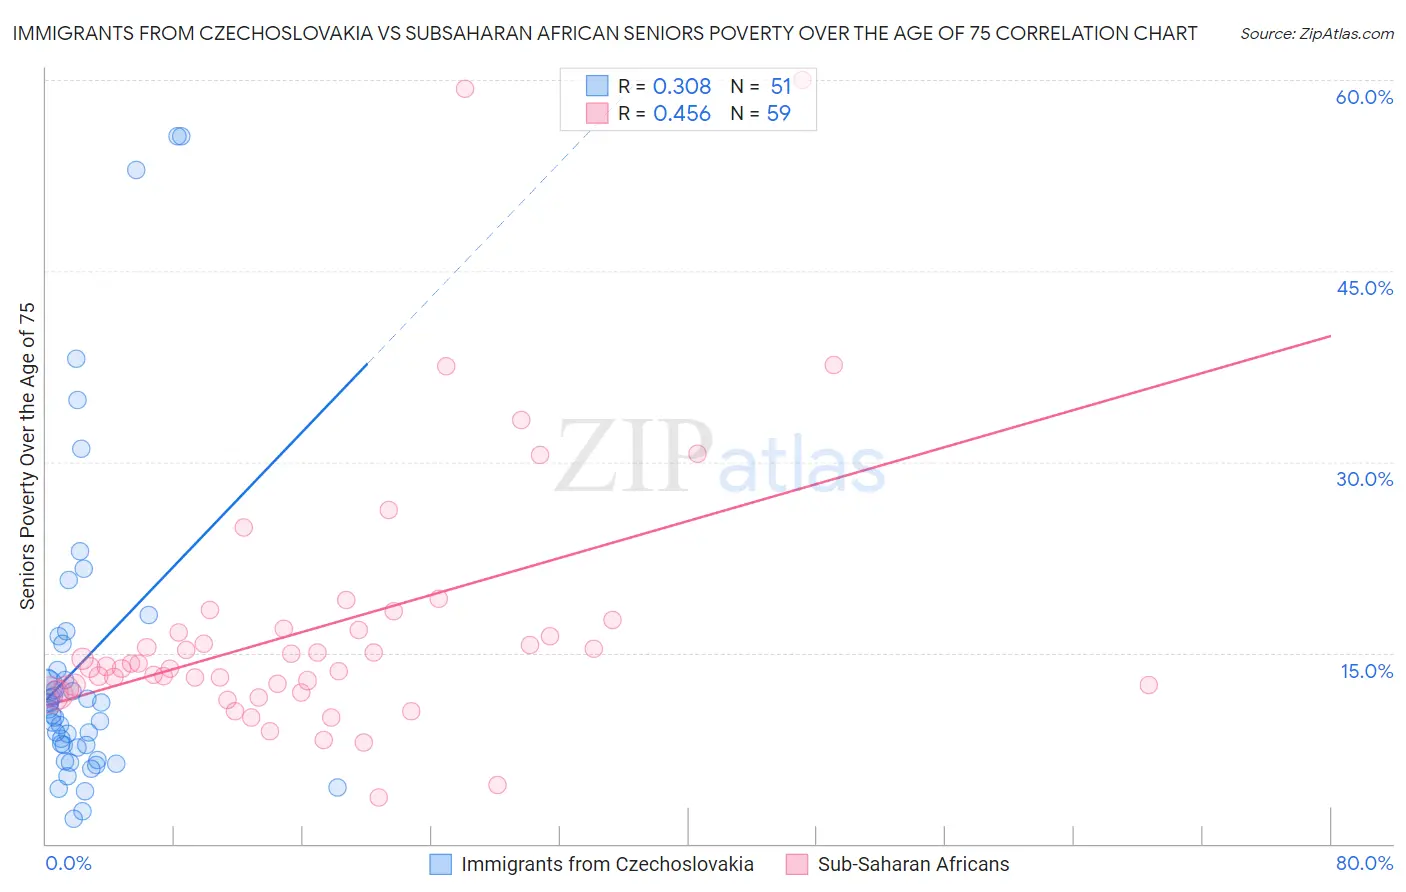 Immigrants from Czechoslovakia vs Subsaharan African Seniors Poverty Over the Age of 75